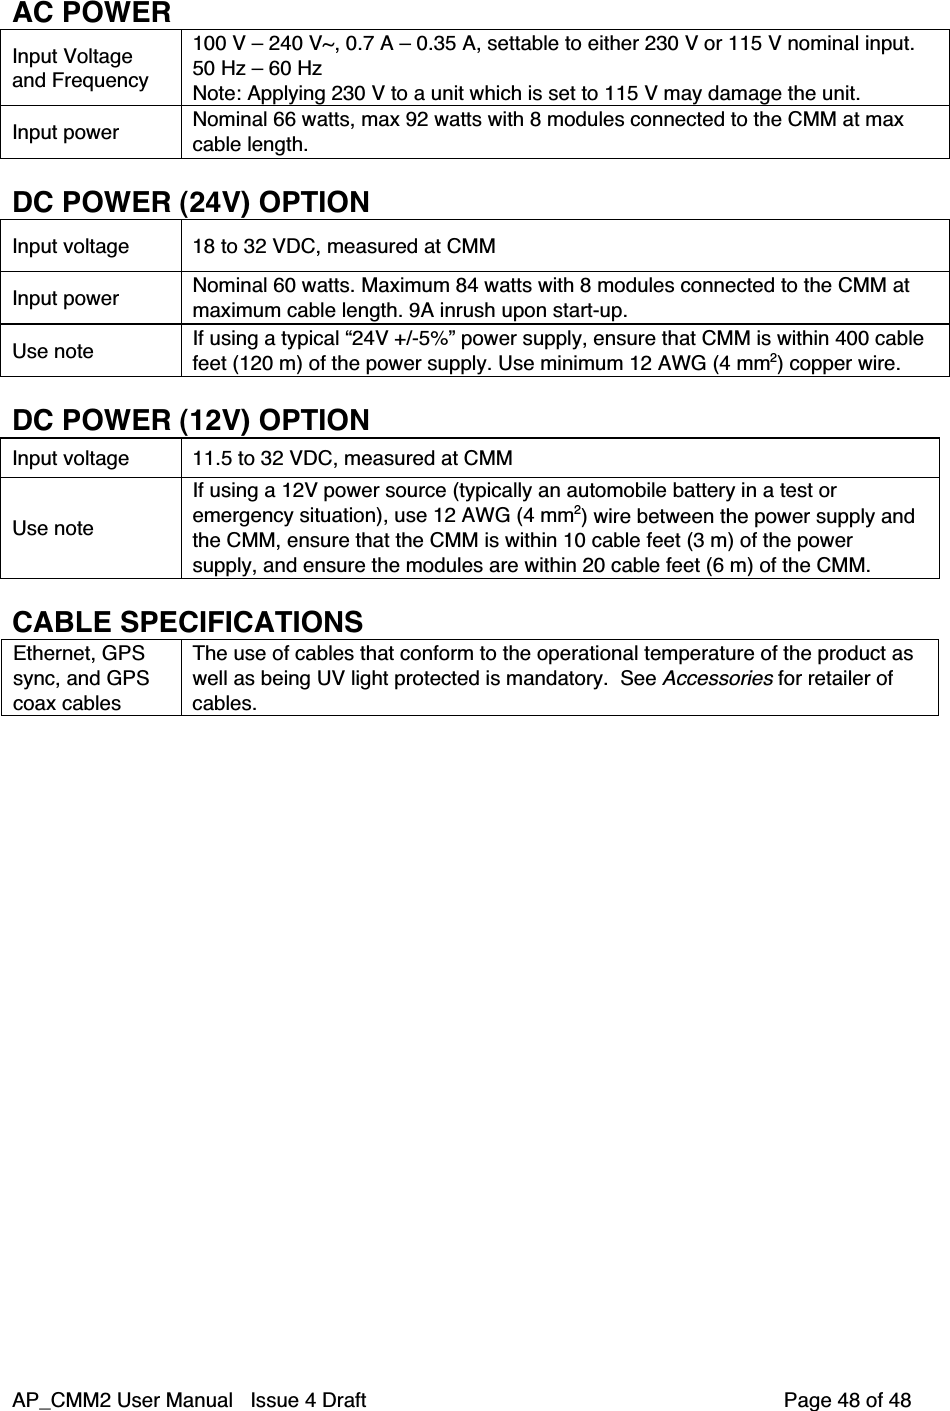 AP_CMM2 User Manual   Issue 4 Draft         Page 48 of 48AC POWERInput Voltageand Frequency100 V – 240 V~, 0.7 A – 0.35 A, settable to either 230 V or 115 V nominal input.50 Hz – 60 HzNote: Applying 230 V to a unit which is set to 115 V may damage the unit.Input power Nominal 66 watts, max 92 watts with 8 modules connected to the CMM at maxcable length.DC POWER (24V) OPTIONInput voltage 18 to 32 VDC, measured at CMMInput power Nominal 60 watts. Maximum 84 watts with 8 modules connected to the CMM atmaximum cable length. 9A inrush upon start-up.Use note If using a typical “24V +/-5%” power supply, ensure that CMM is within 400 cablefeet (120 m) of the power supply. Use minimum 12 AWG (4 mm2) copper wire.DC POWER (12V) OPTIONInput voltage 11.5 to 32 VDC, measured at CMMUse noteIf using a 12V power source (typically an automobile battery in a test oremergency situation), use 12 AWG (4 mm2) wire between the power supply andthe CMM, ensure that the CMM is within 10 cable feet (3 m) of the powersupply, and ensure the modules are within 20 cable feet (6 m) of the CMM.CABLE SPECIFICATIONSEthernet, GPSsync, and GPScoax cablesThe use of cables that conform to the operational temperature of the product aswell as being UV light protected is mandatory.  See Accessories for retailer ofcables.